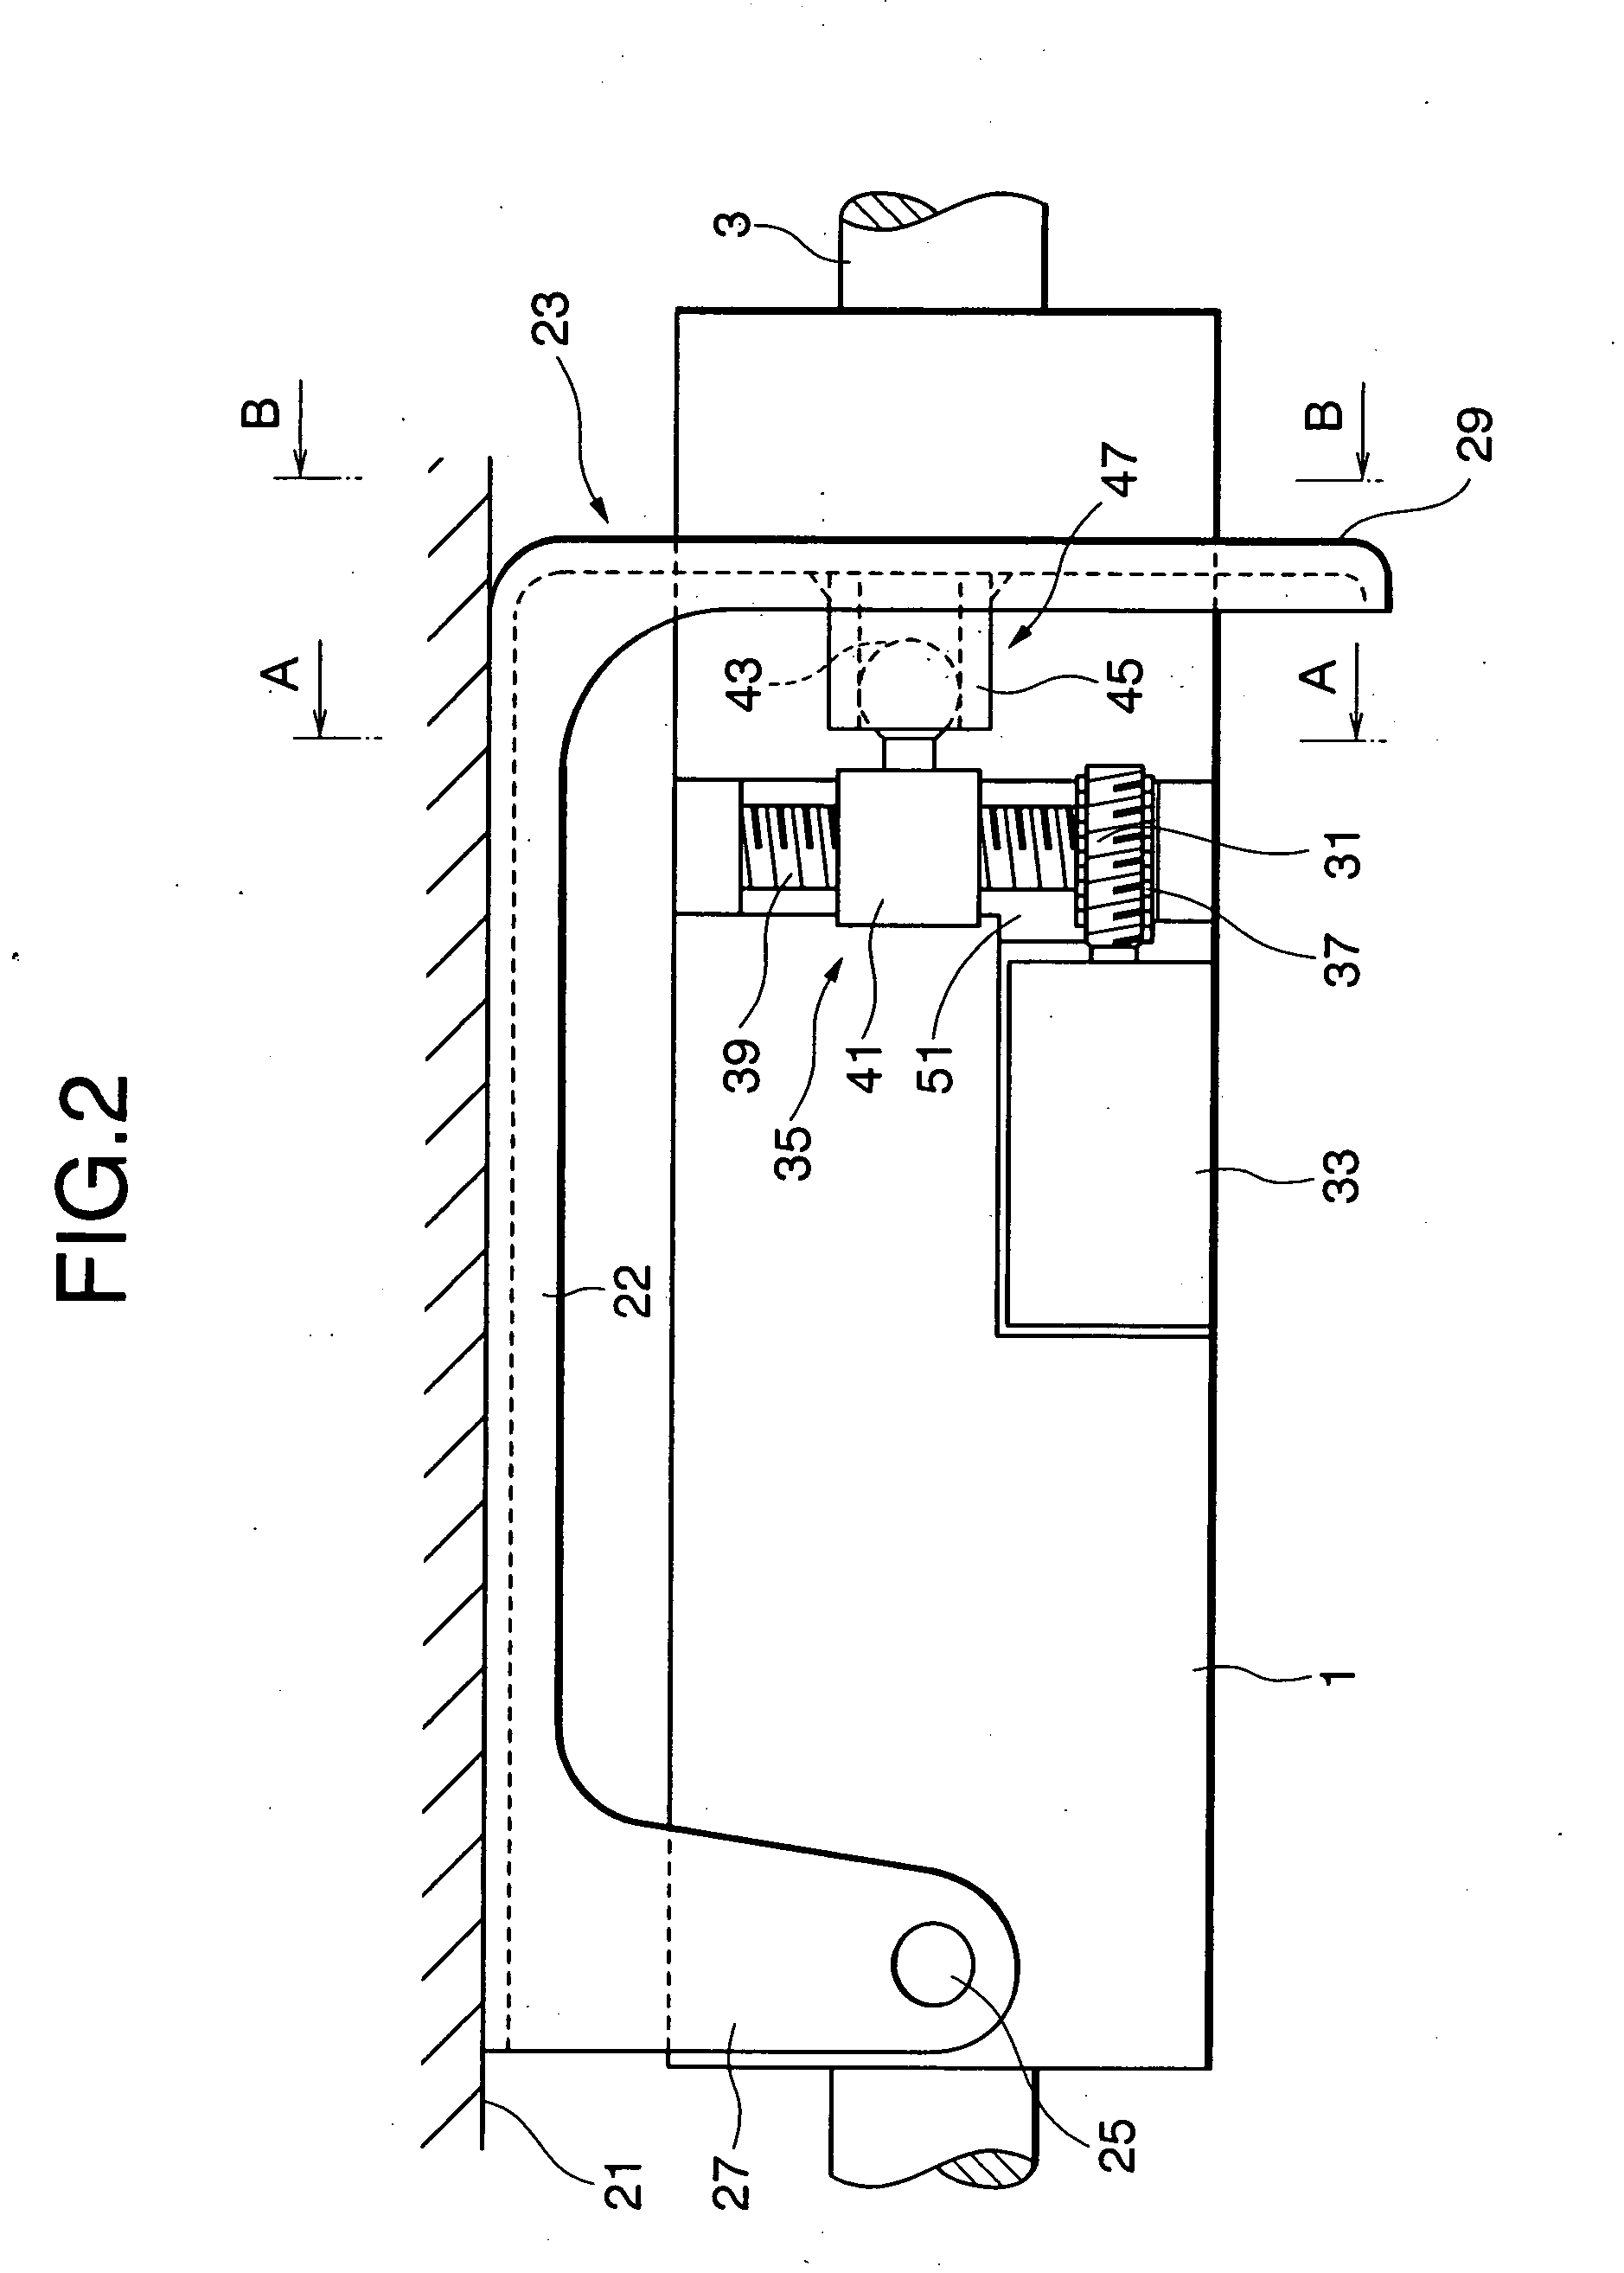 Electrically-driven steering column apparatus